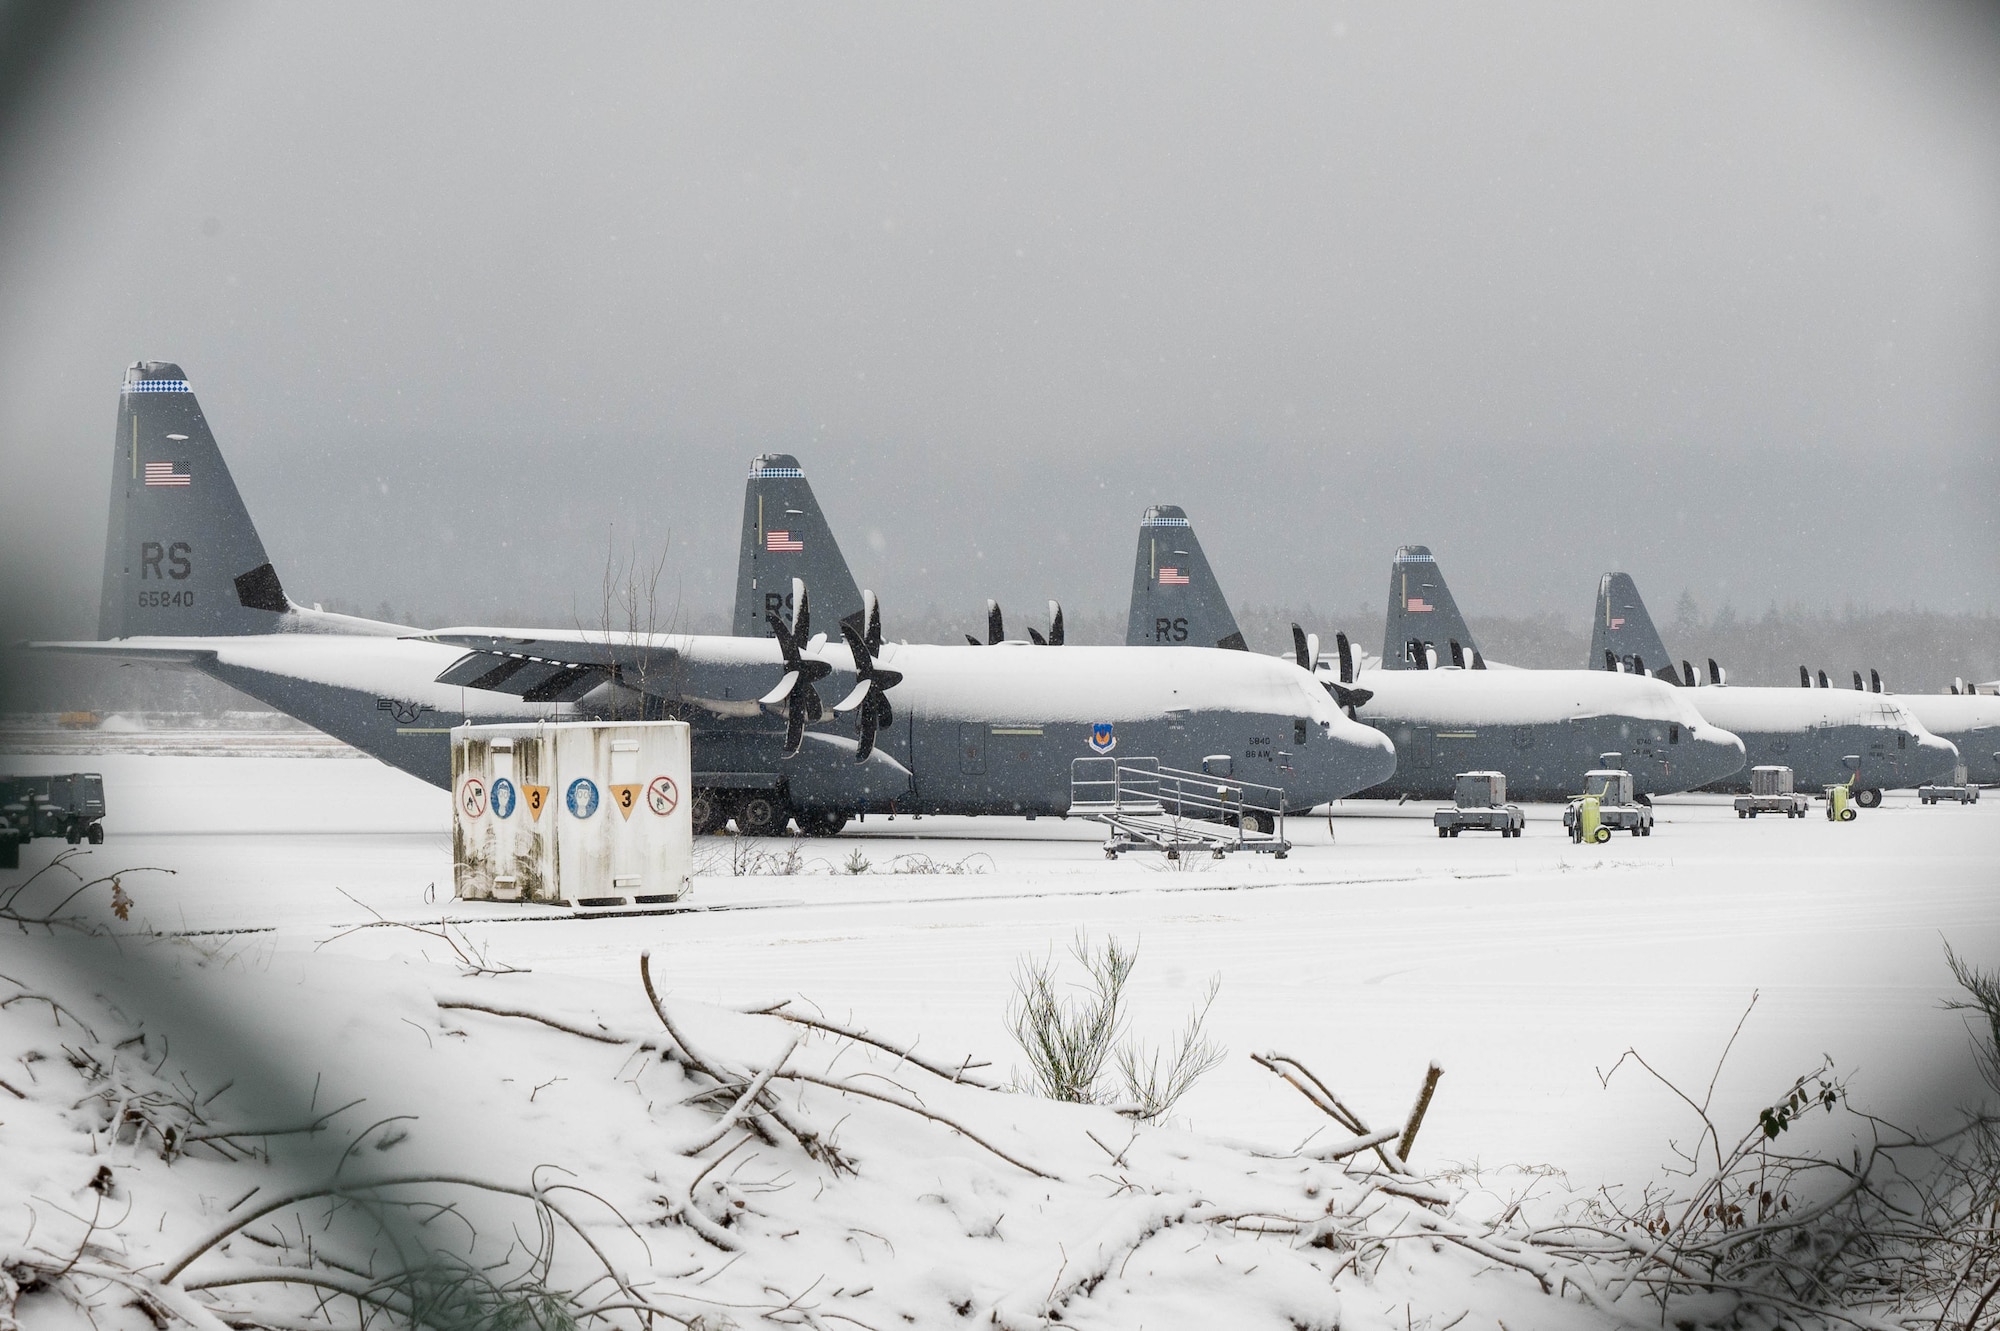 Five aircraft sit on the flightline as it snows